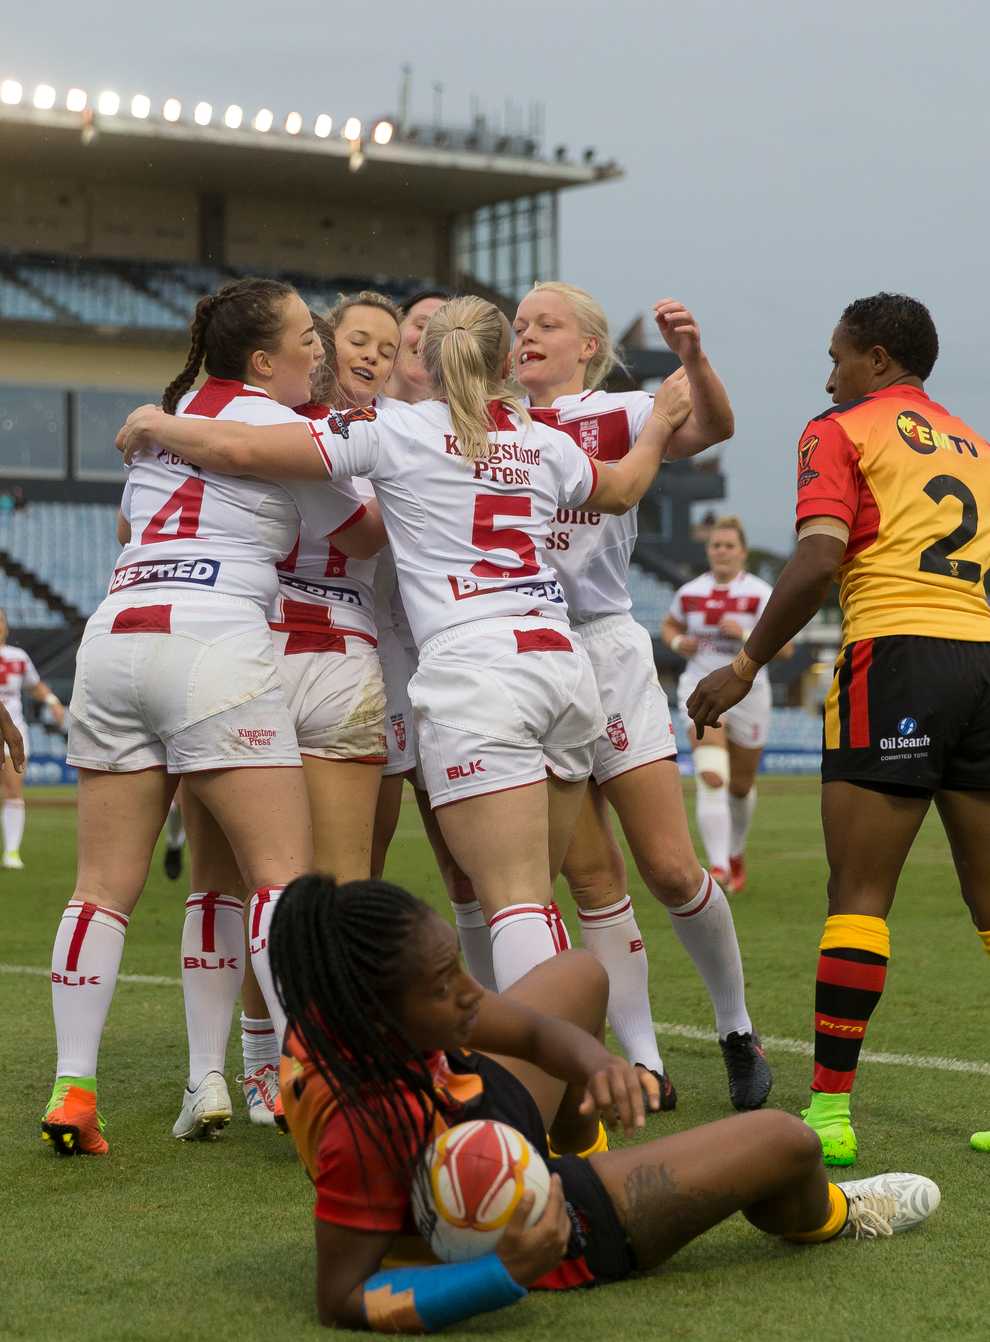 England reached the semi-finals of the World Cup in 2017